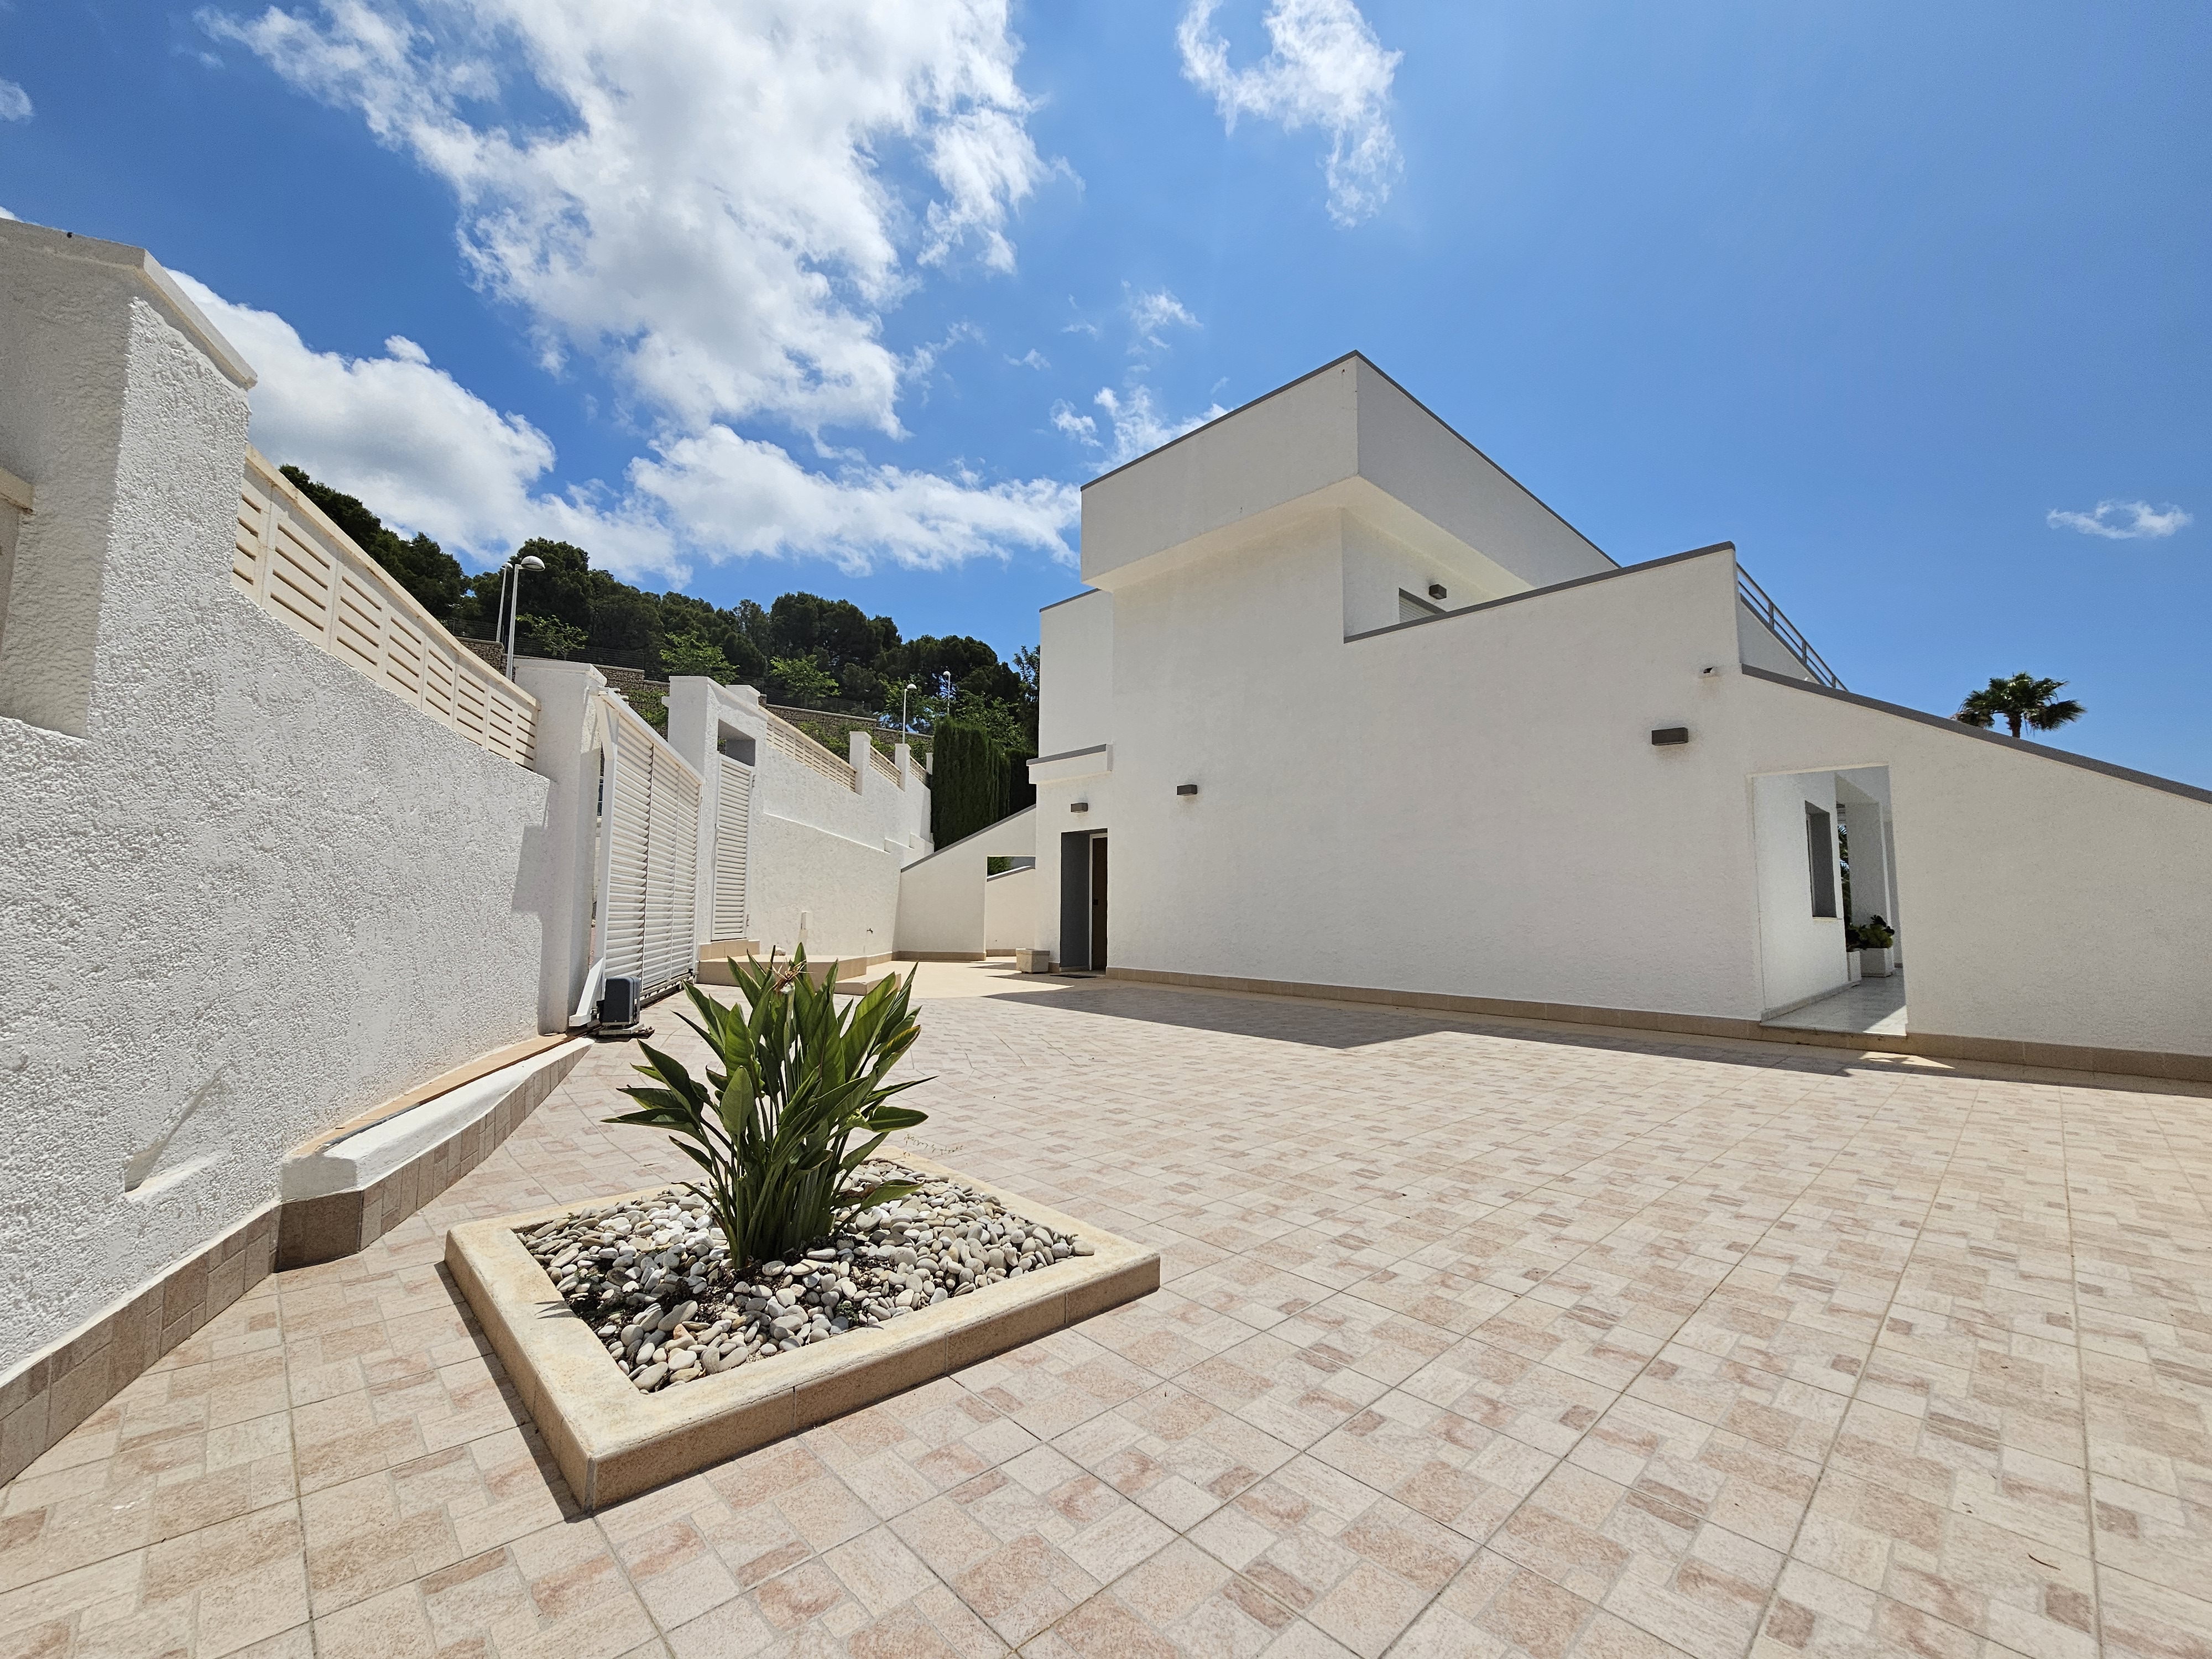 VILLA WITH LARGE INTERIOR SPACES WELL LOCATED A FEW STEPS FROM THE SEA AND THE URBAN CENTER.